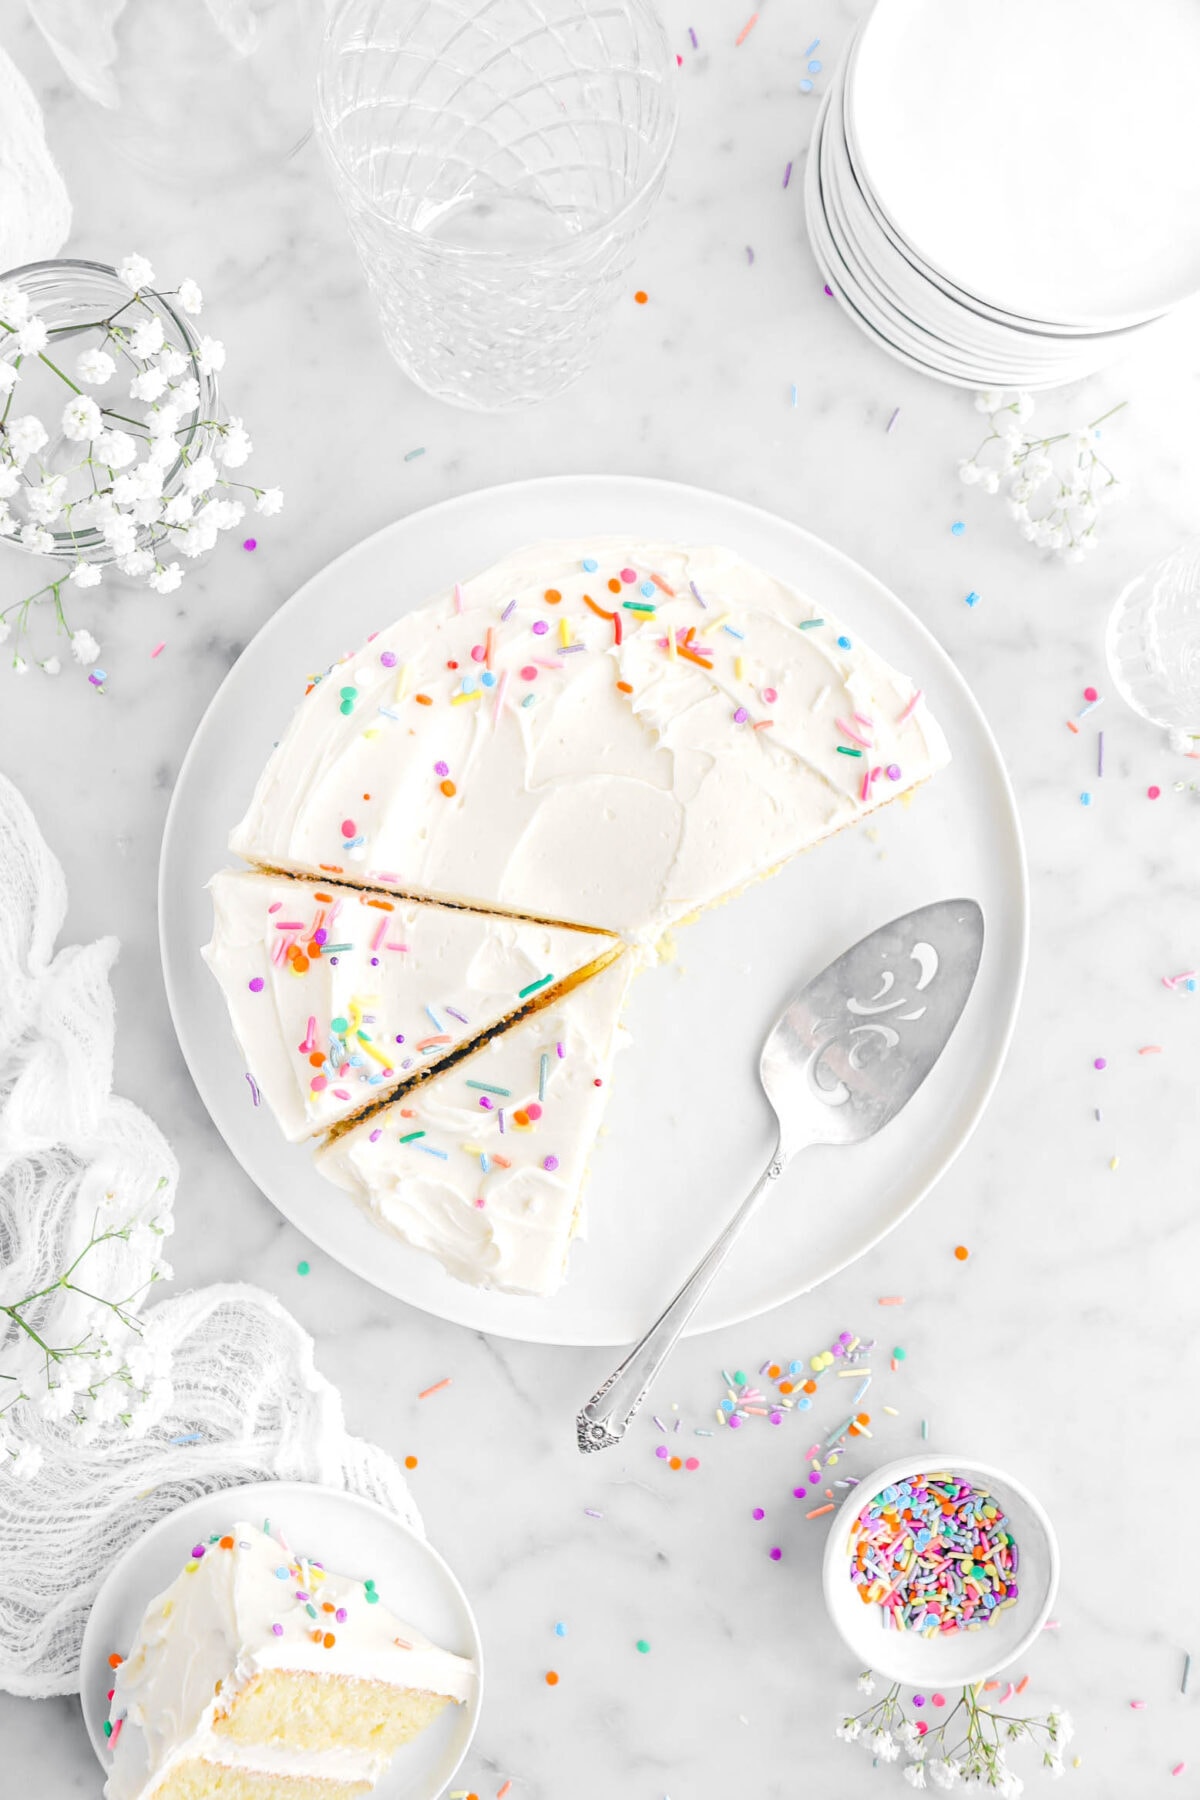 overhead shot of vanilla cake on white plate with two slices cut into and cake knife beside cake, with sprinkles, white flowers, stack of plates, and slice of cake on small white plate on top of white cheesecloth.